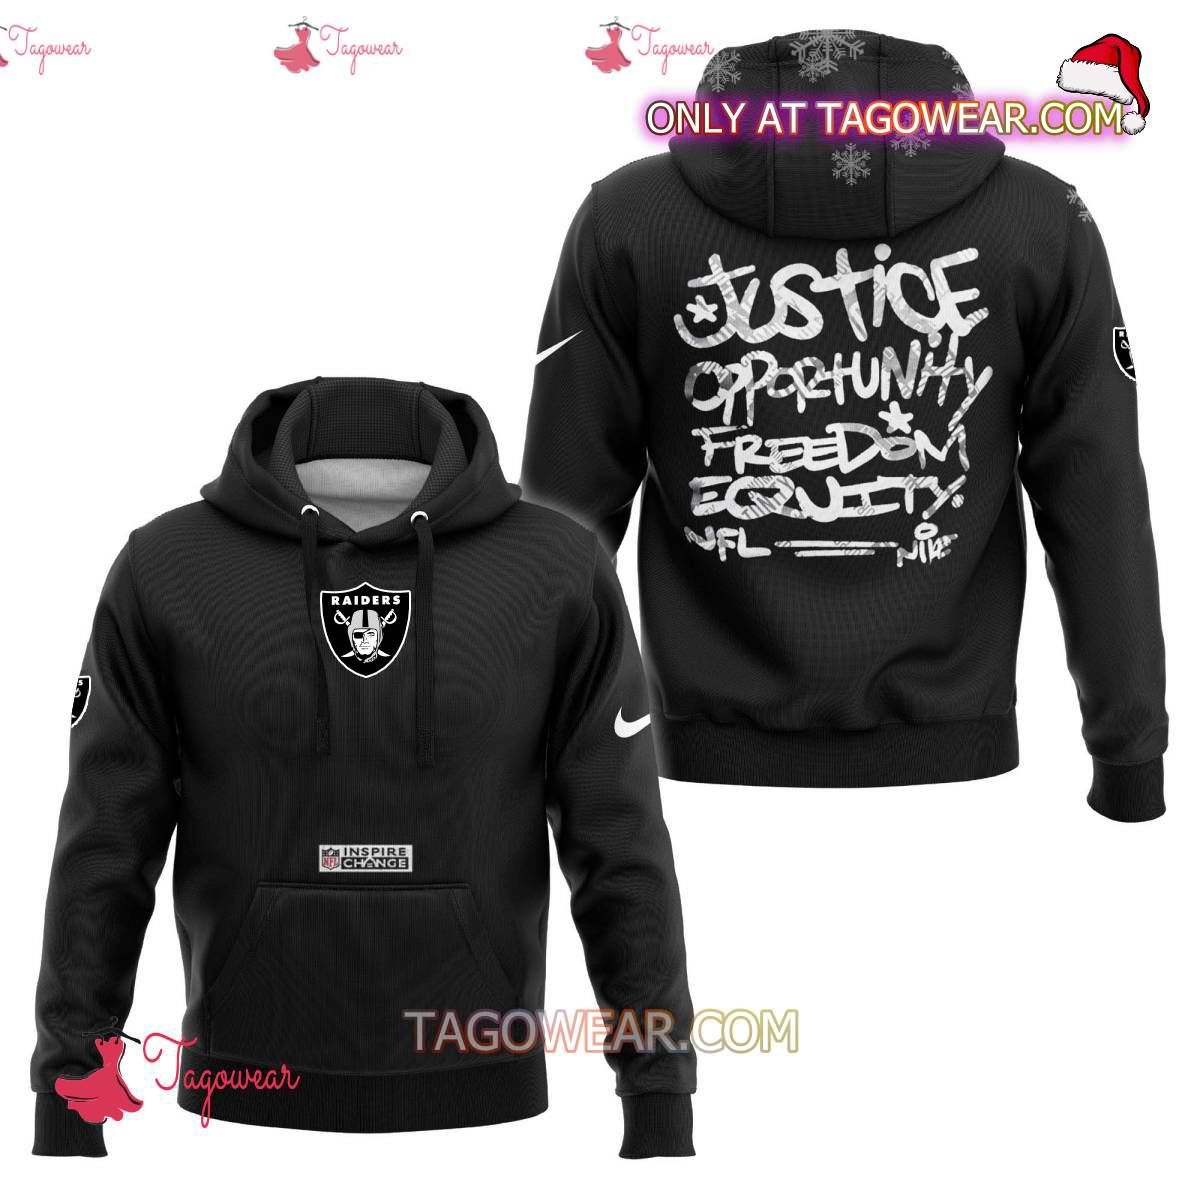 Las Vegas Raiders NFL Inspire Change Justice Opportunity Equality Freedom Hoodie